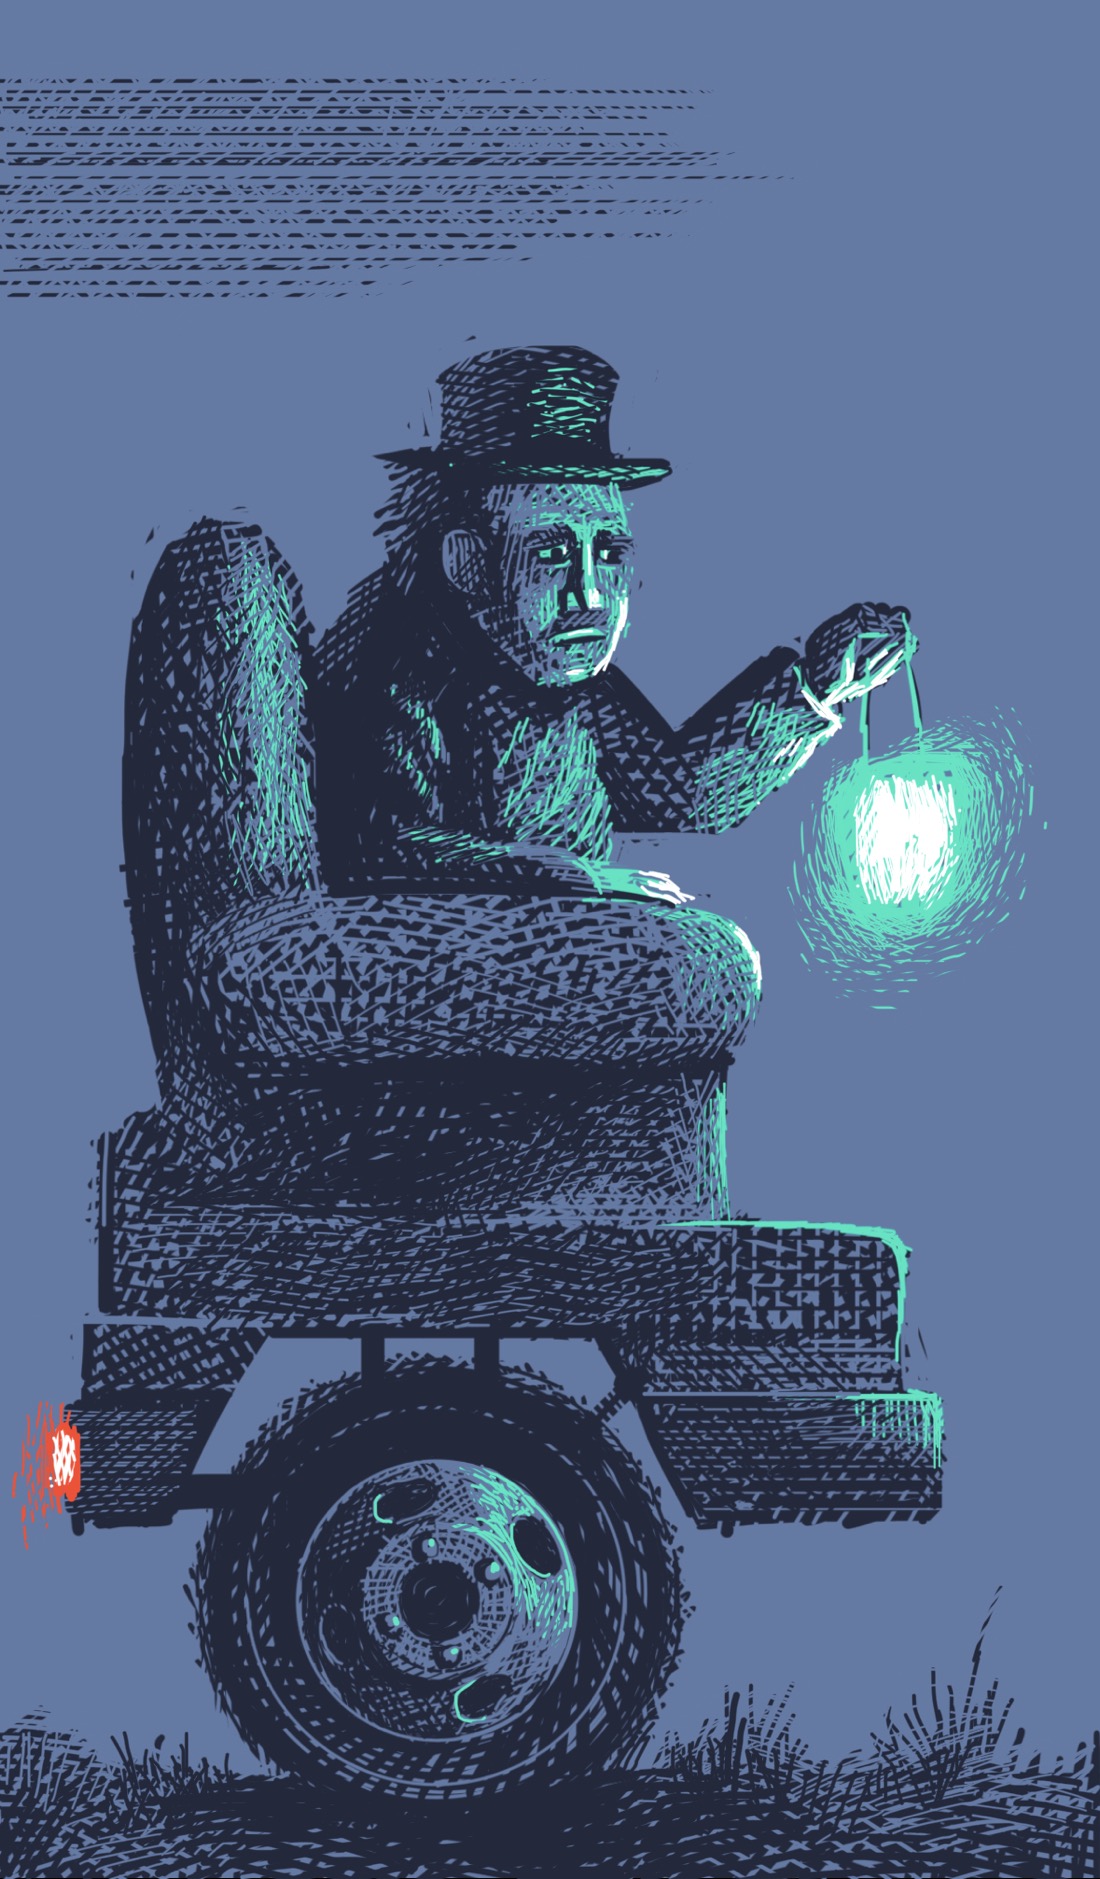 A fellow wearing a top hat rides in an odd conveyance with only one truck wheel on either side. It's a dismal night: no stars, no moon. The only light comes from the phosphor-green lantern held by the rider, whose face is eerily lit. There is also a red taillight. There's a suggestion of clouds overhead, but the general environment is barren and featureless.